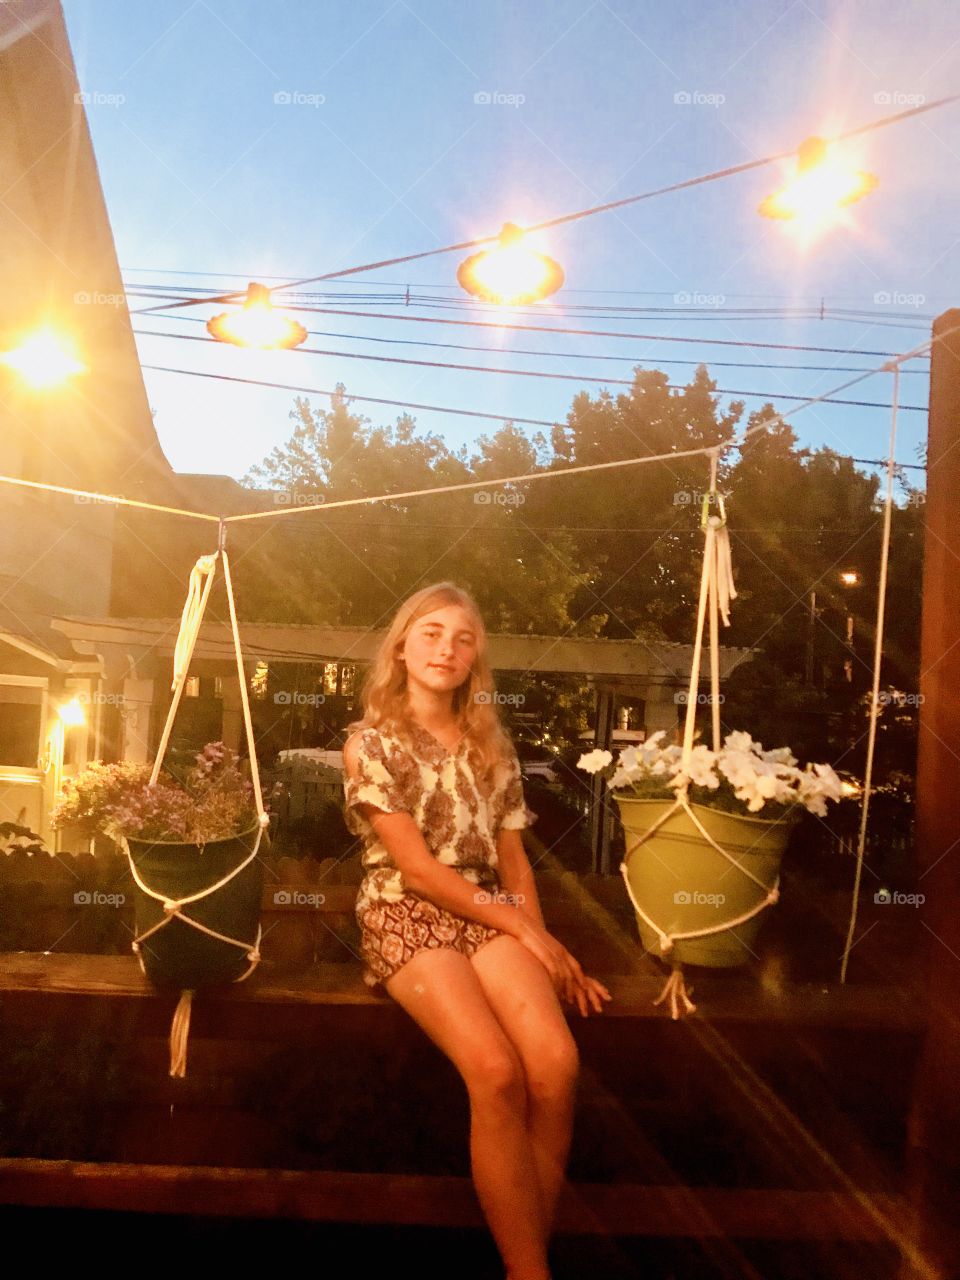 This is a beautiful photo at dusk with a pretty girl with fairy lights and flowers